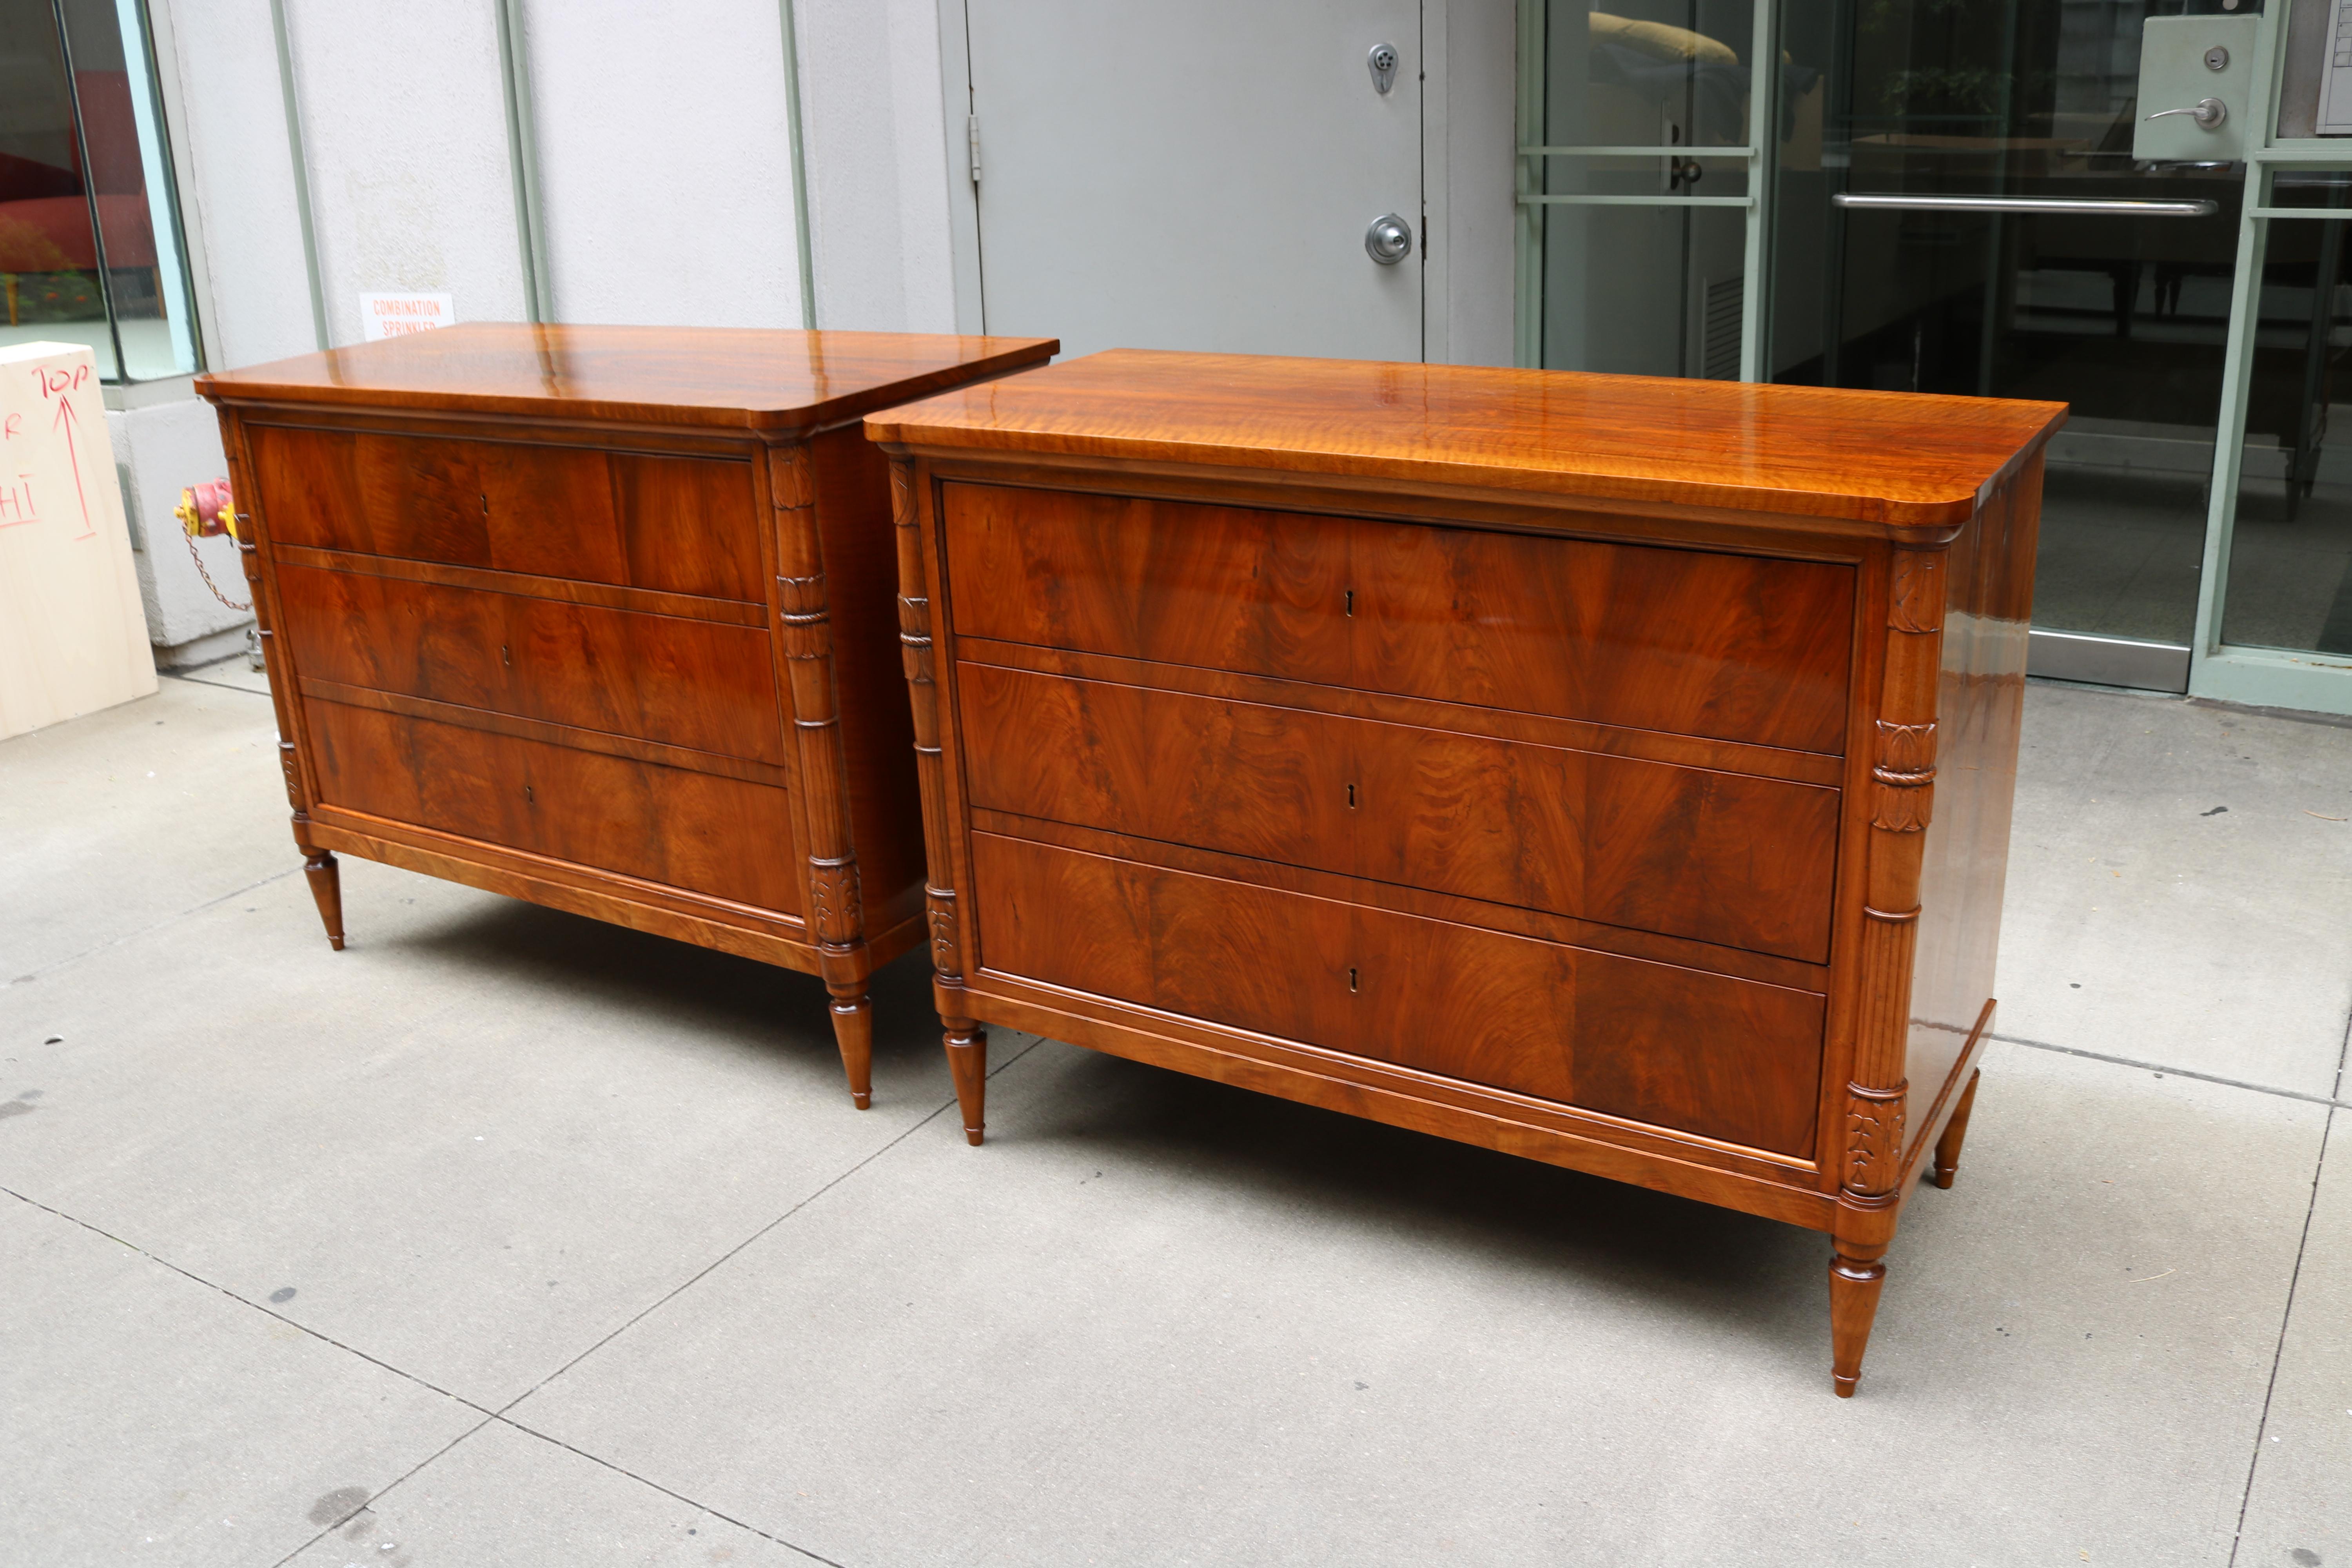 A pair of fine 19th Century commodes in walnut. 
Fine carved columnar details resulting in an elegant tapered look.